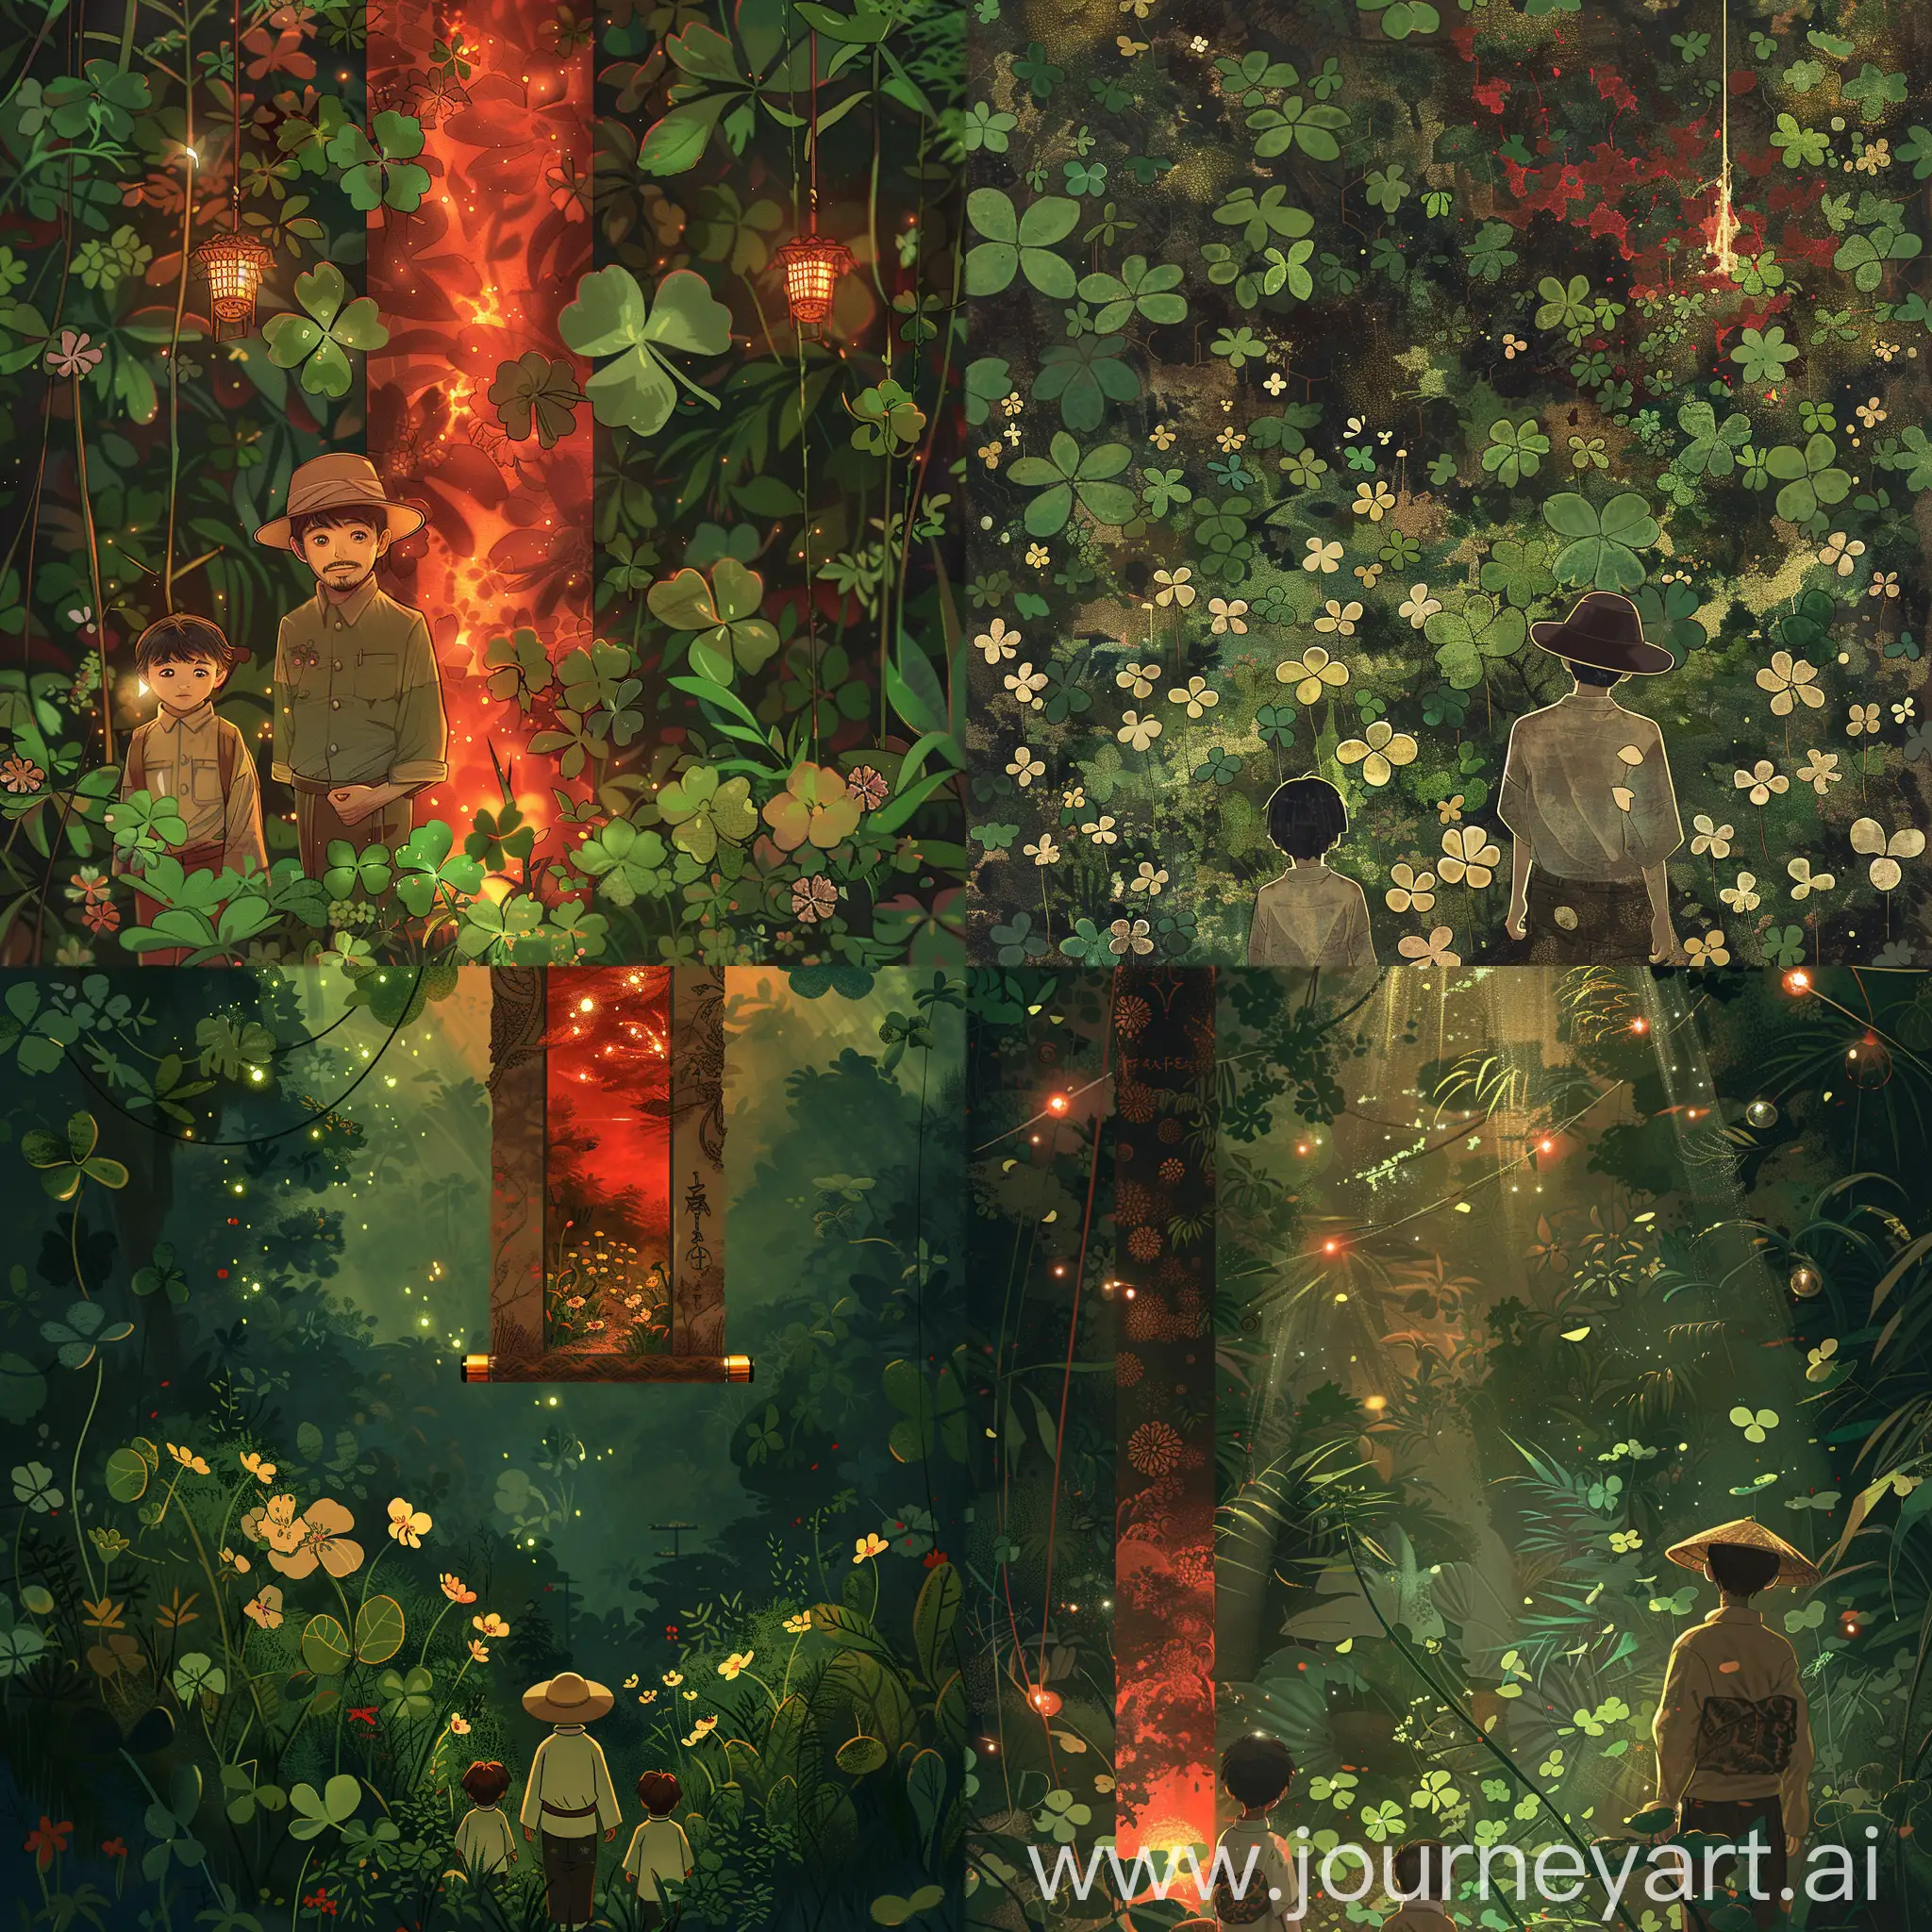 an illustration forest exploration a japan on outdoor hat a man with a 2boys, looking ((clover flowers beam lights))(zoom up), clover flowers fields jungle, in the style of dark gold molten filigree and red, confessional, playful and whimsical designs, notable sense of movement, i can't believe how beautiful this is, high-angle, hanging scroll